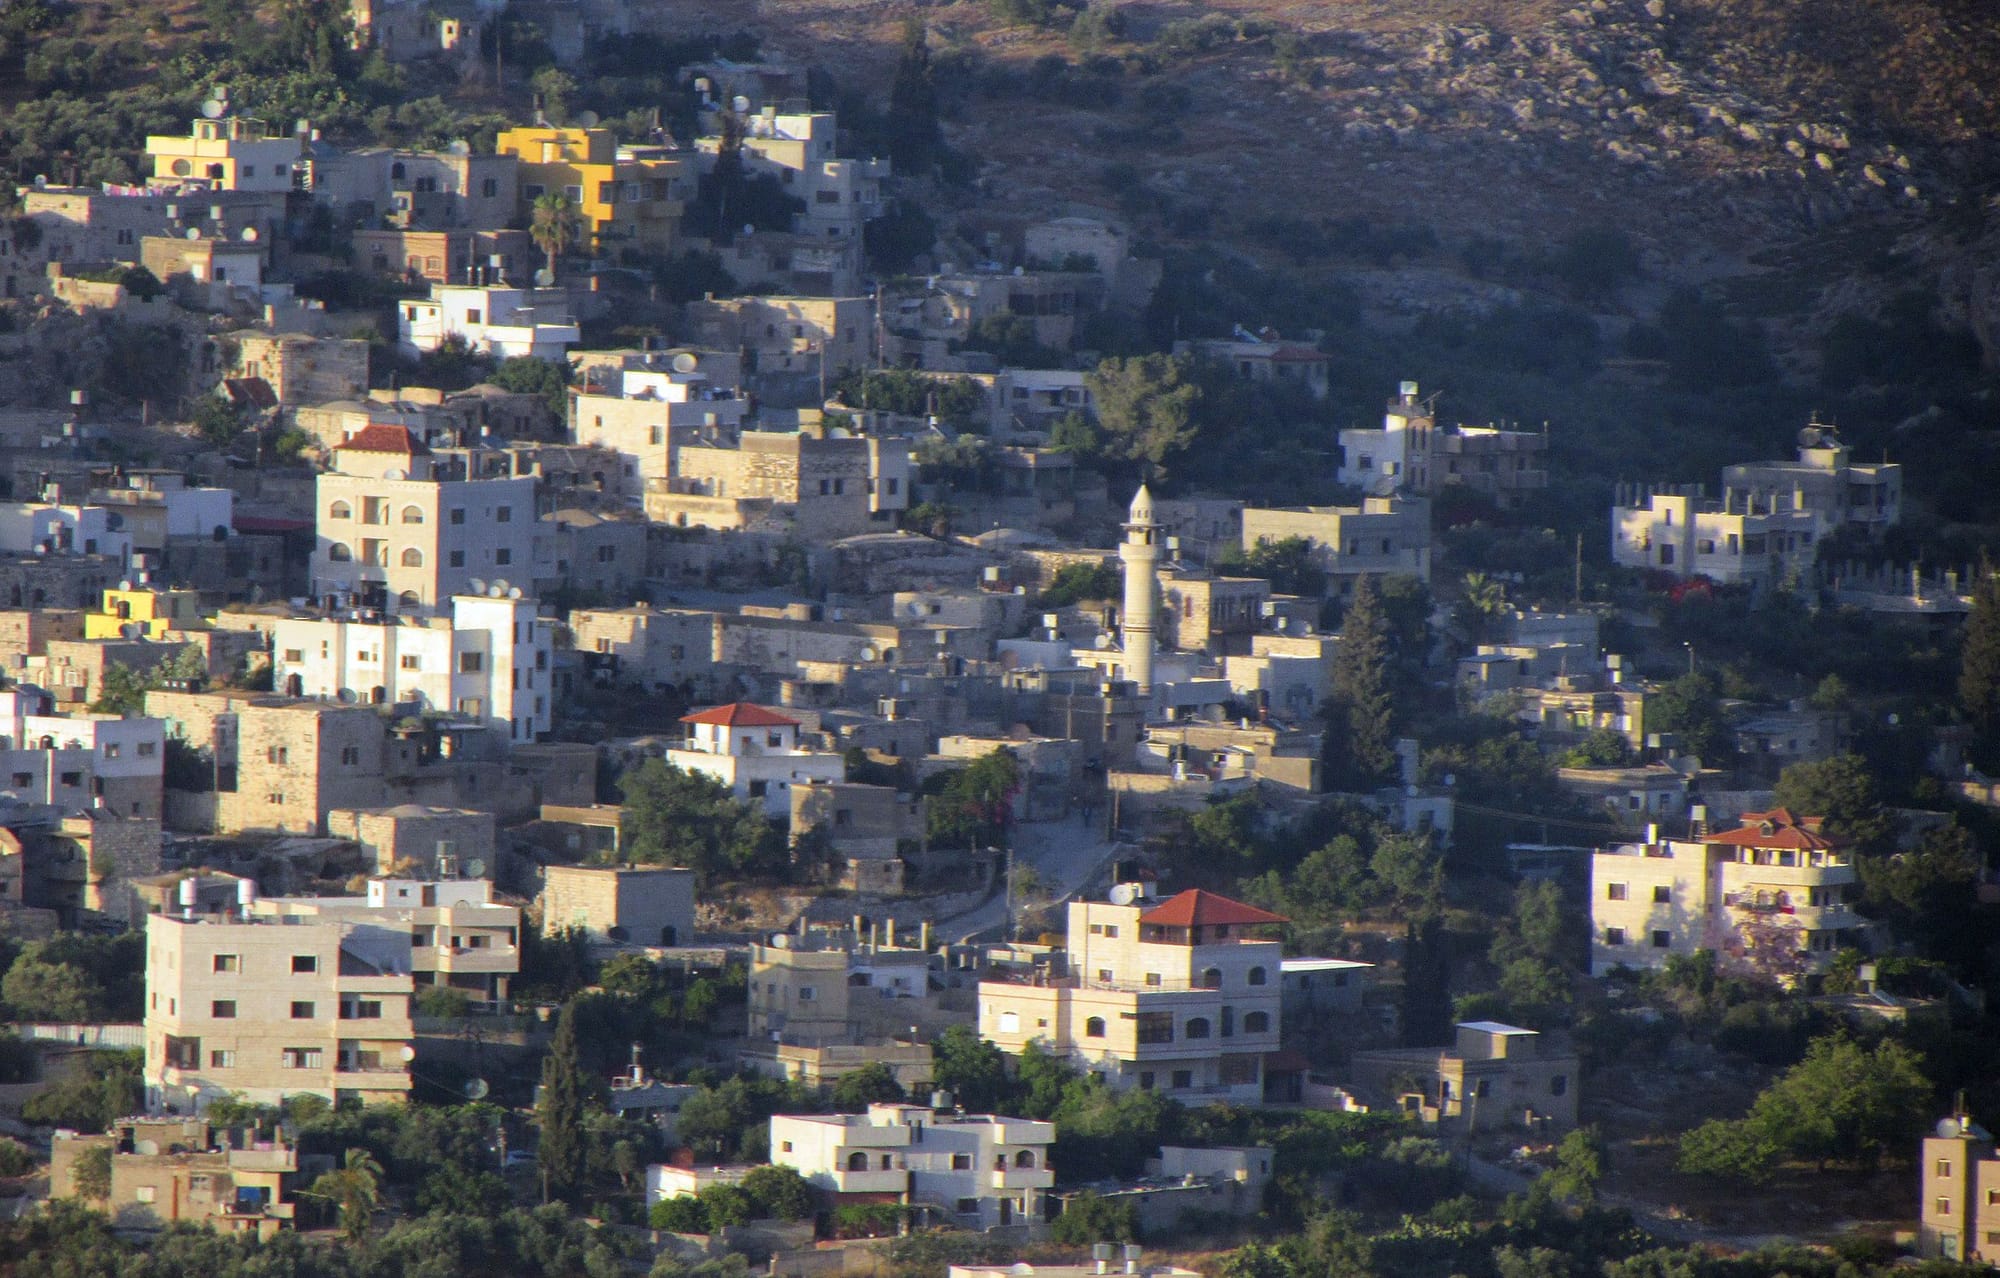 The town of Burin, with low buildings and a minaret amid trees on a rocky hillside